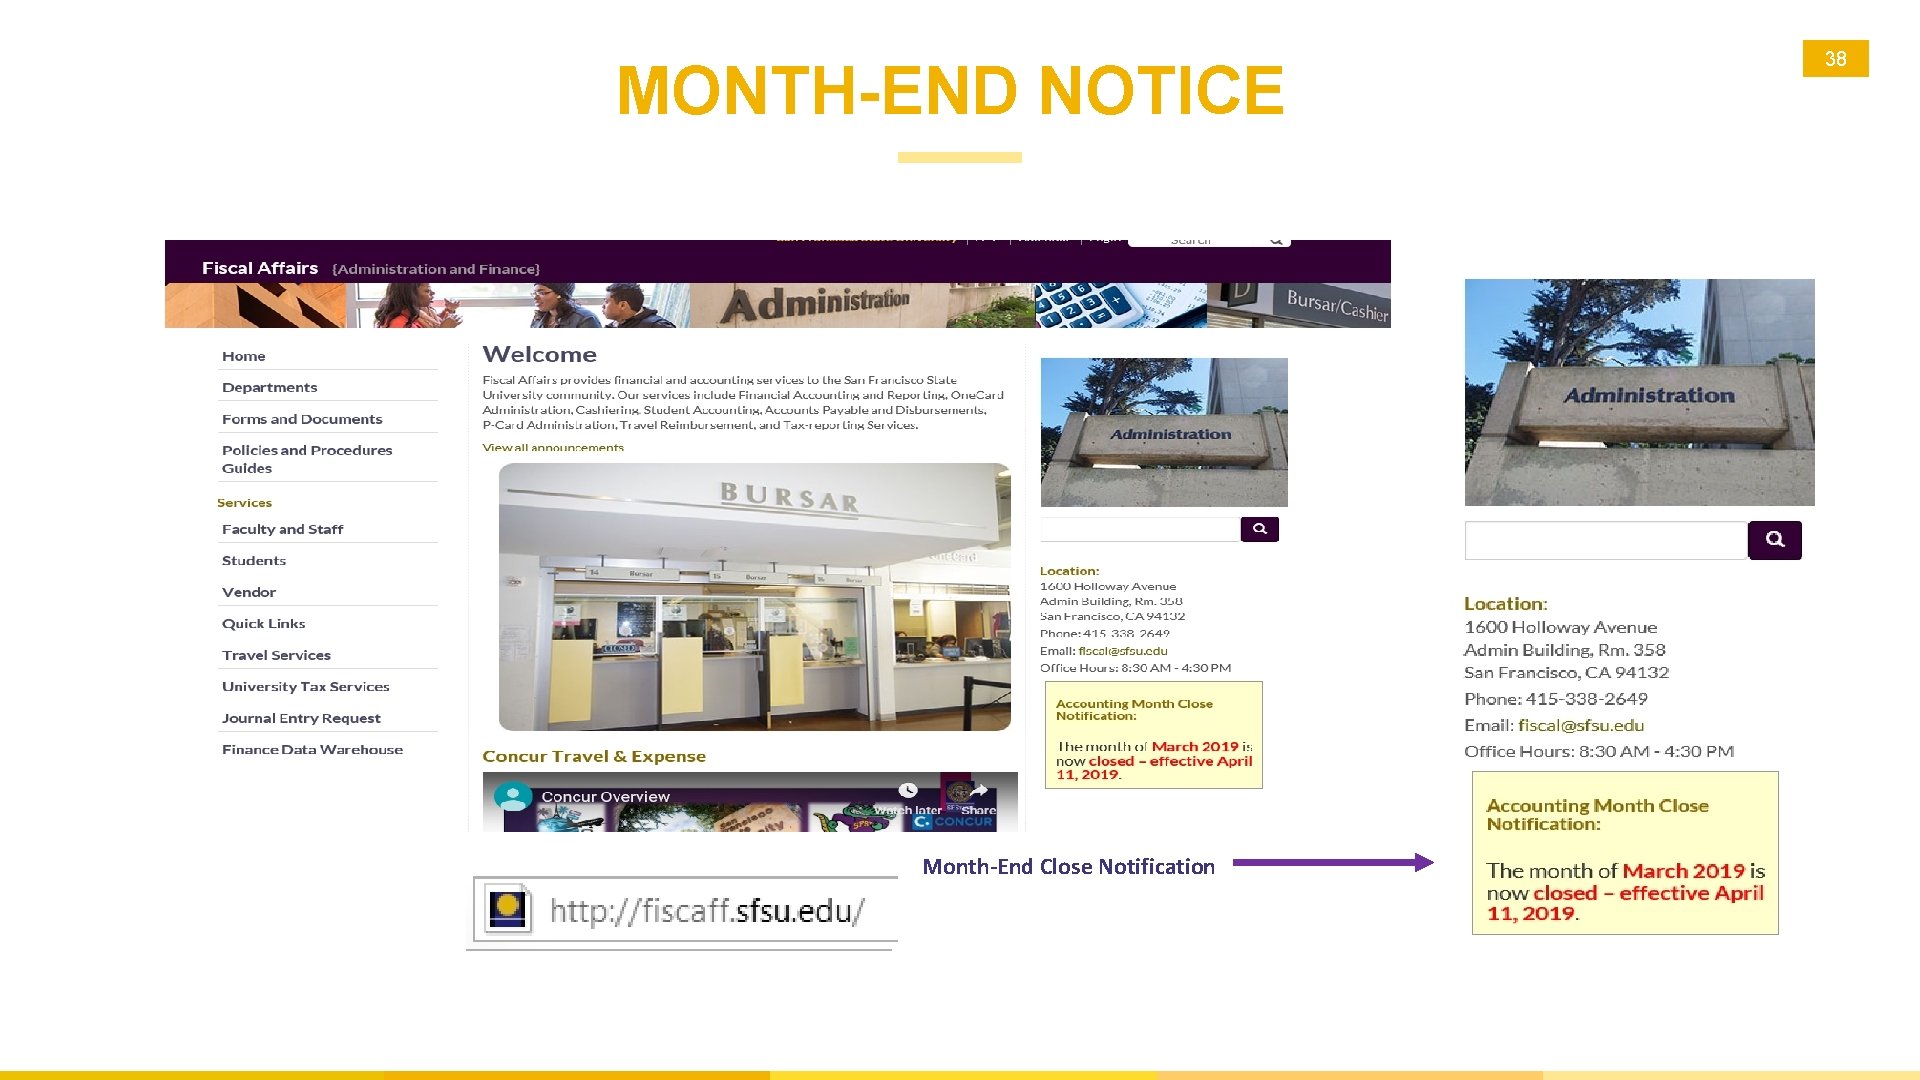 MONTH-END NOTICE Month-End Close Notification 38 